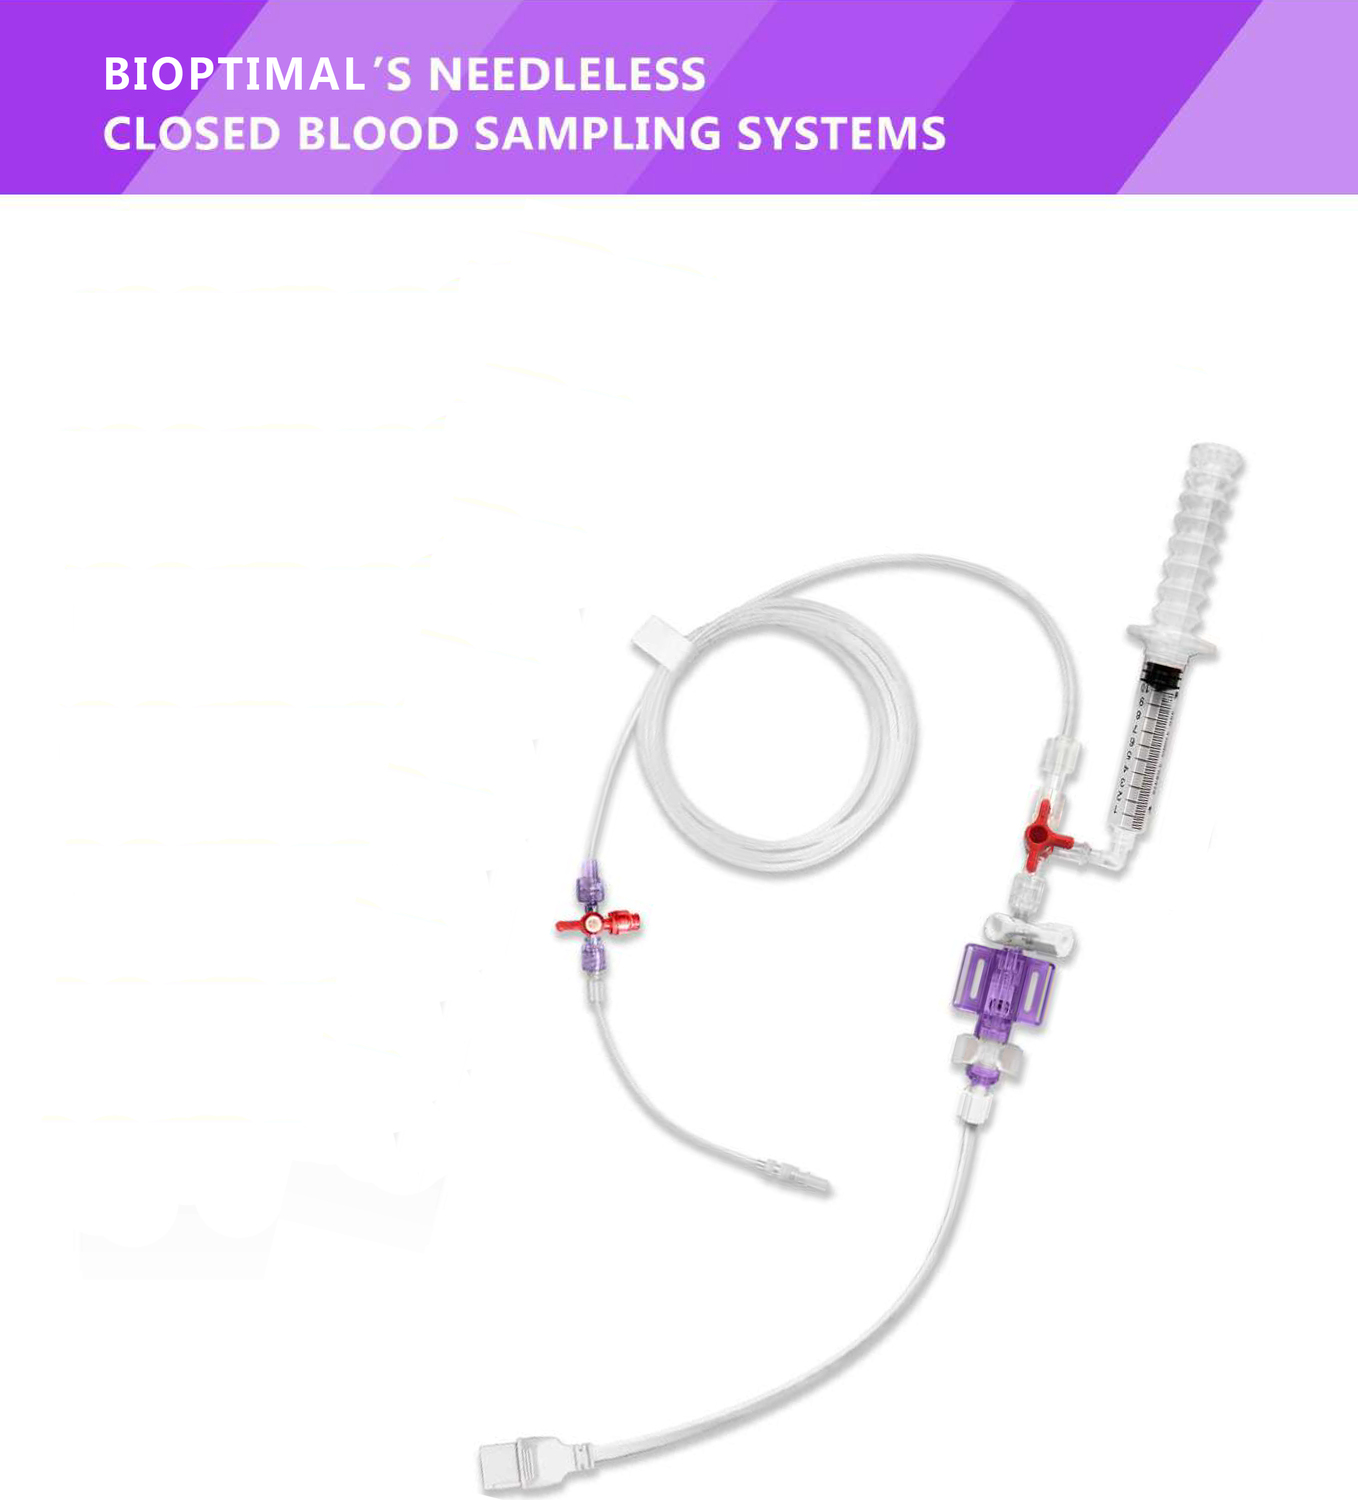 Bioptimal`s Needleles Closed Blood Sampling System Czech Republic medical market medical equipment, tools, components interventional cardiology, radiology, angiology, arrhythmology, electrophysiology and neurophysiology